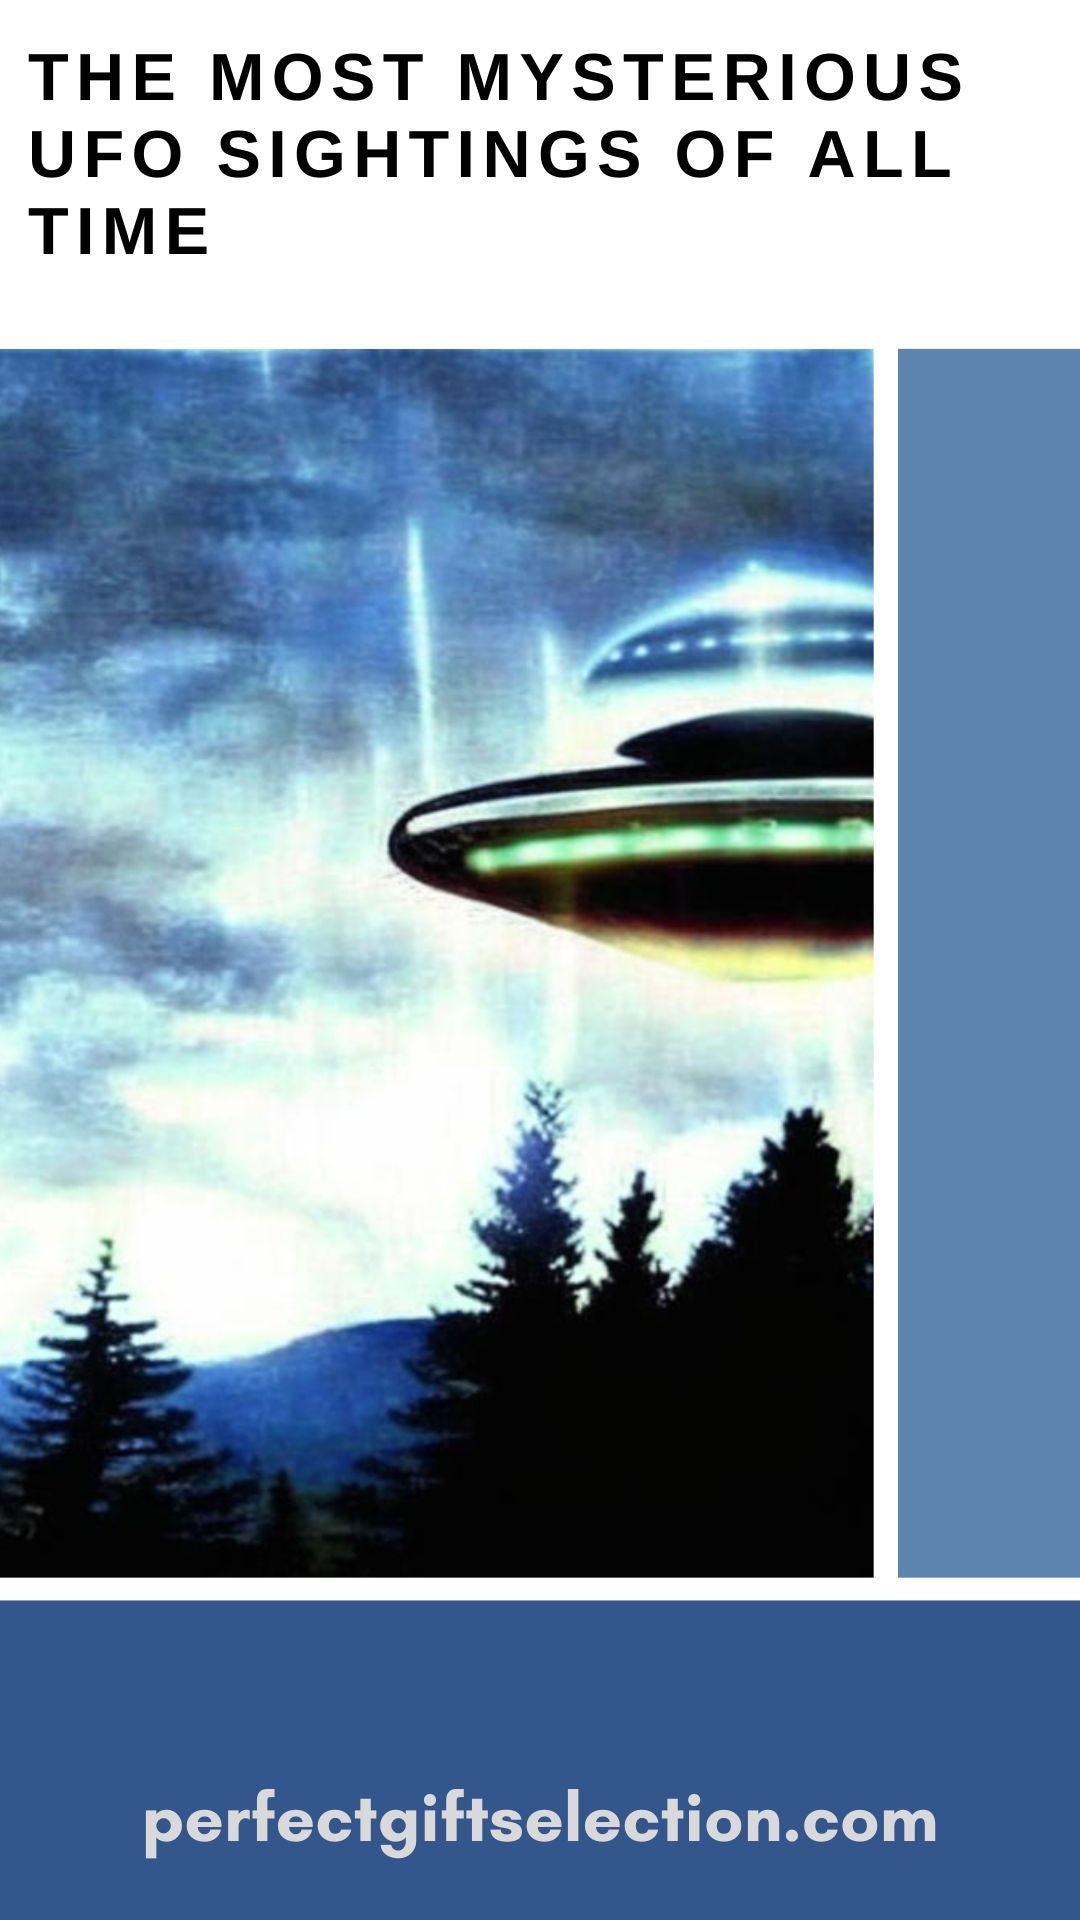 The Most Mysterious UFO Sightings of All Time Ichaku [Perfect Gifts Selection]